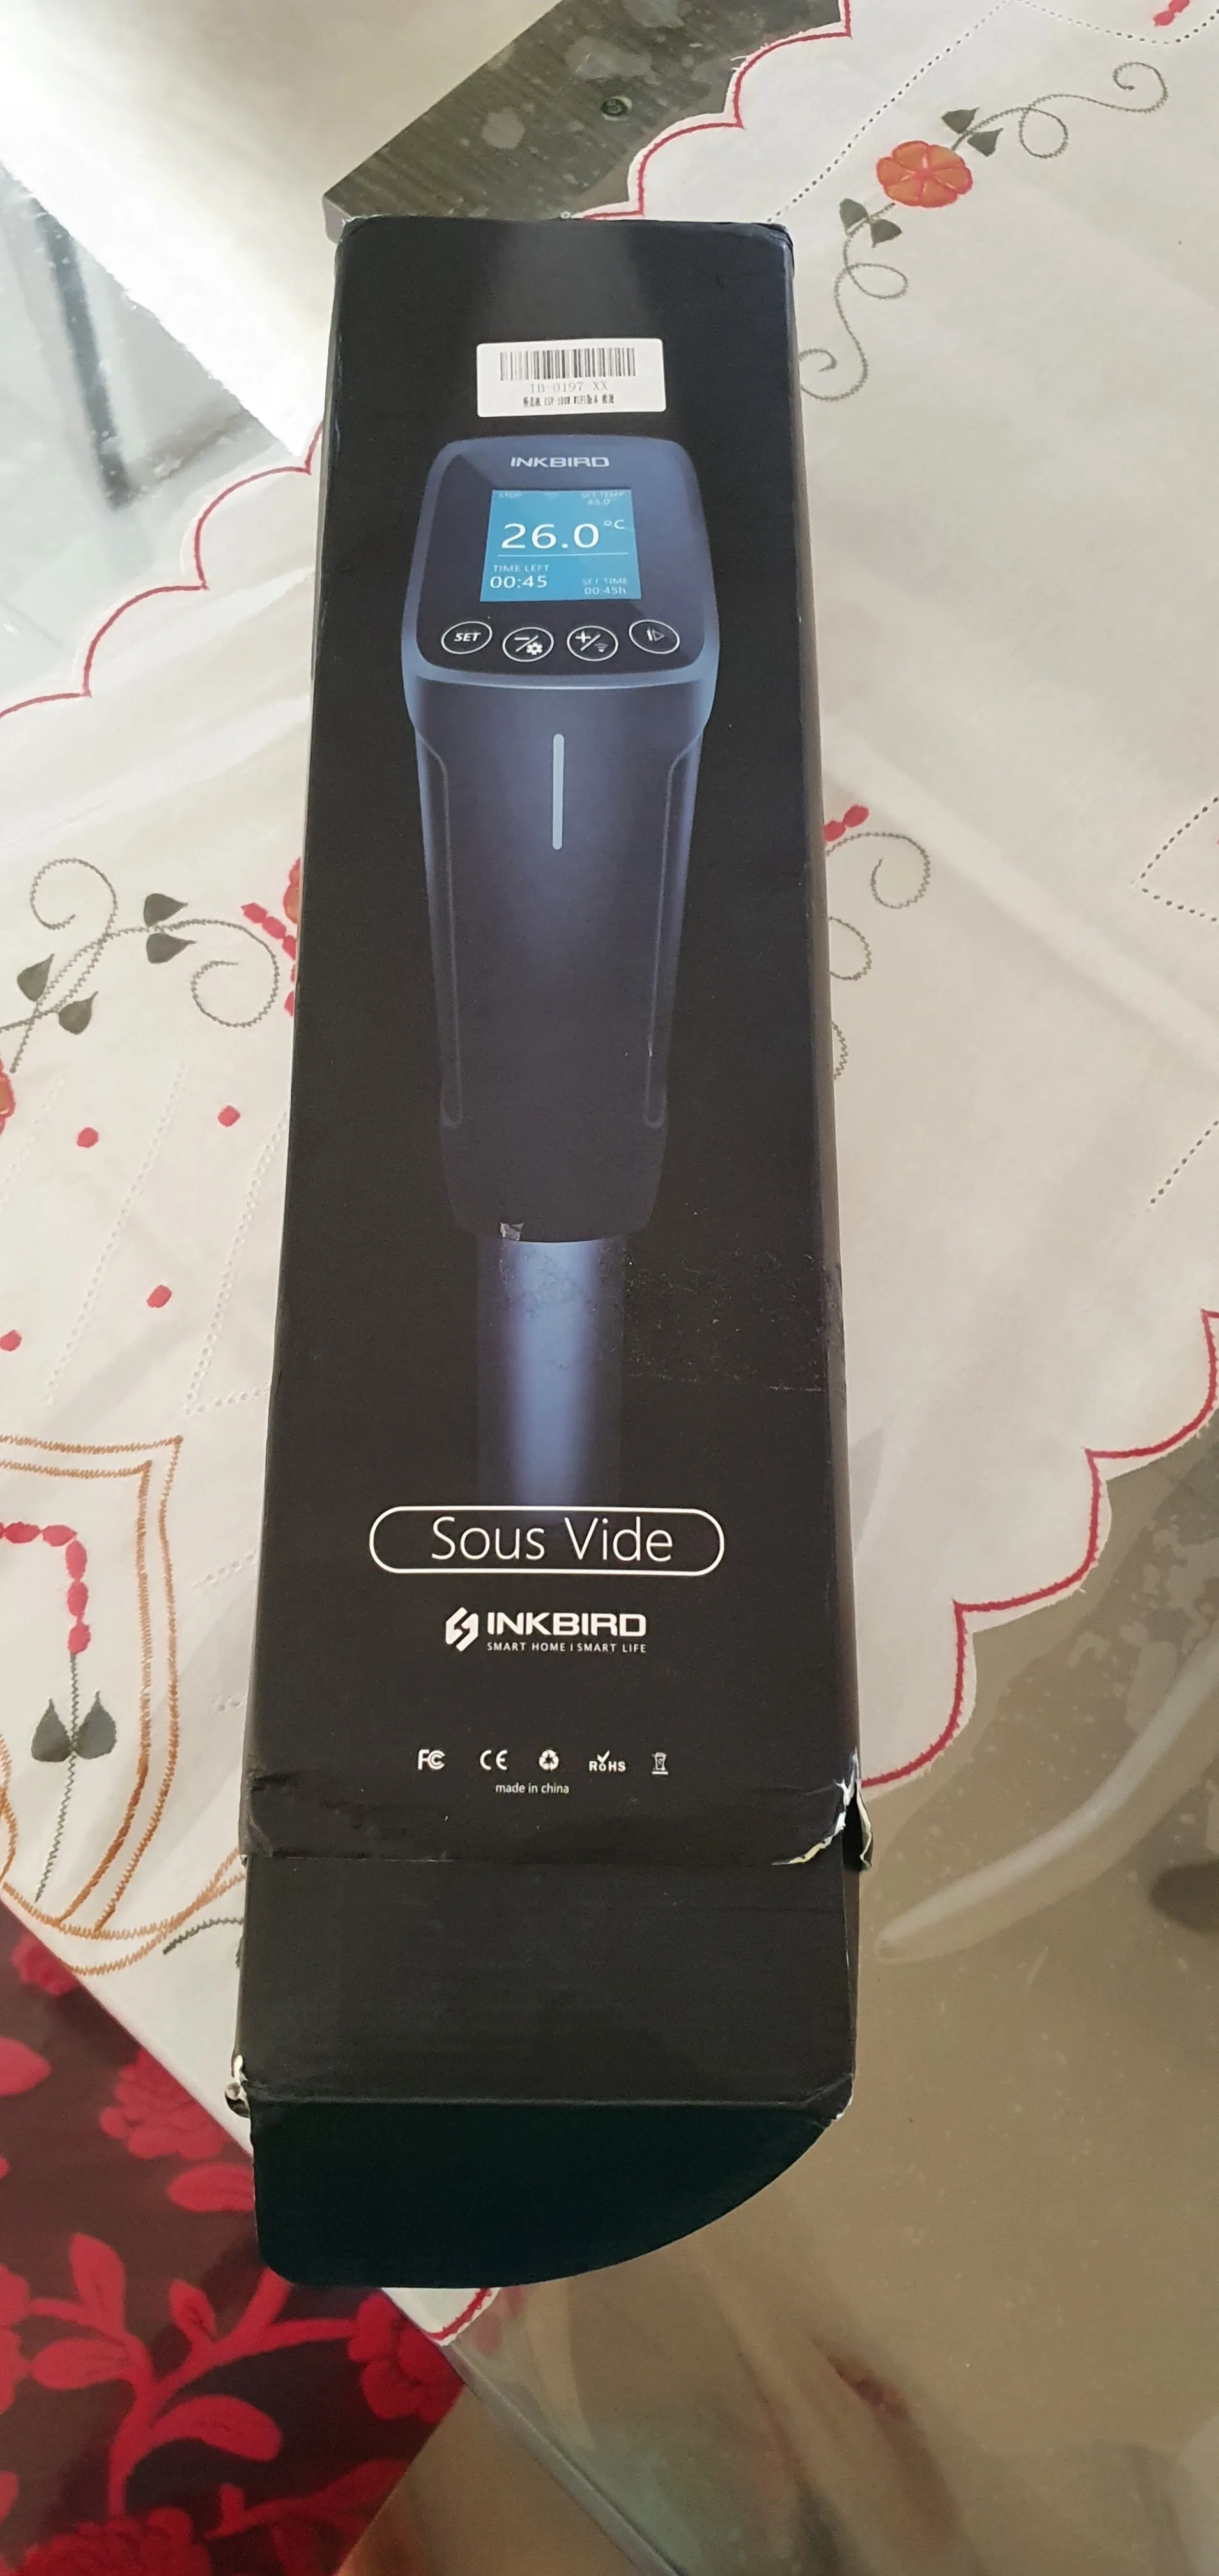 Inkbird Sous Vide WI-FI Culinary Cooker 1000W Precise Temperature photo review